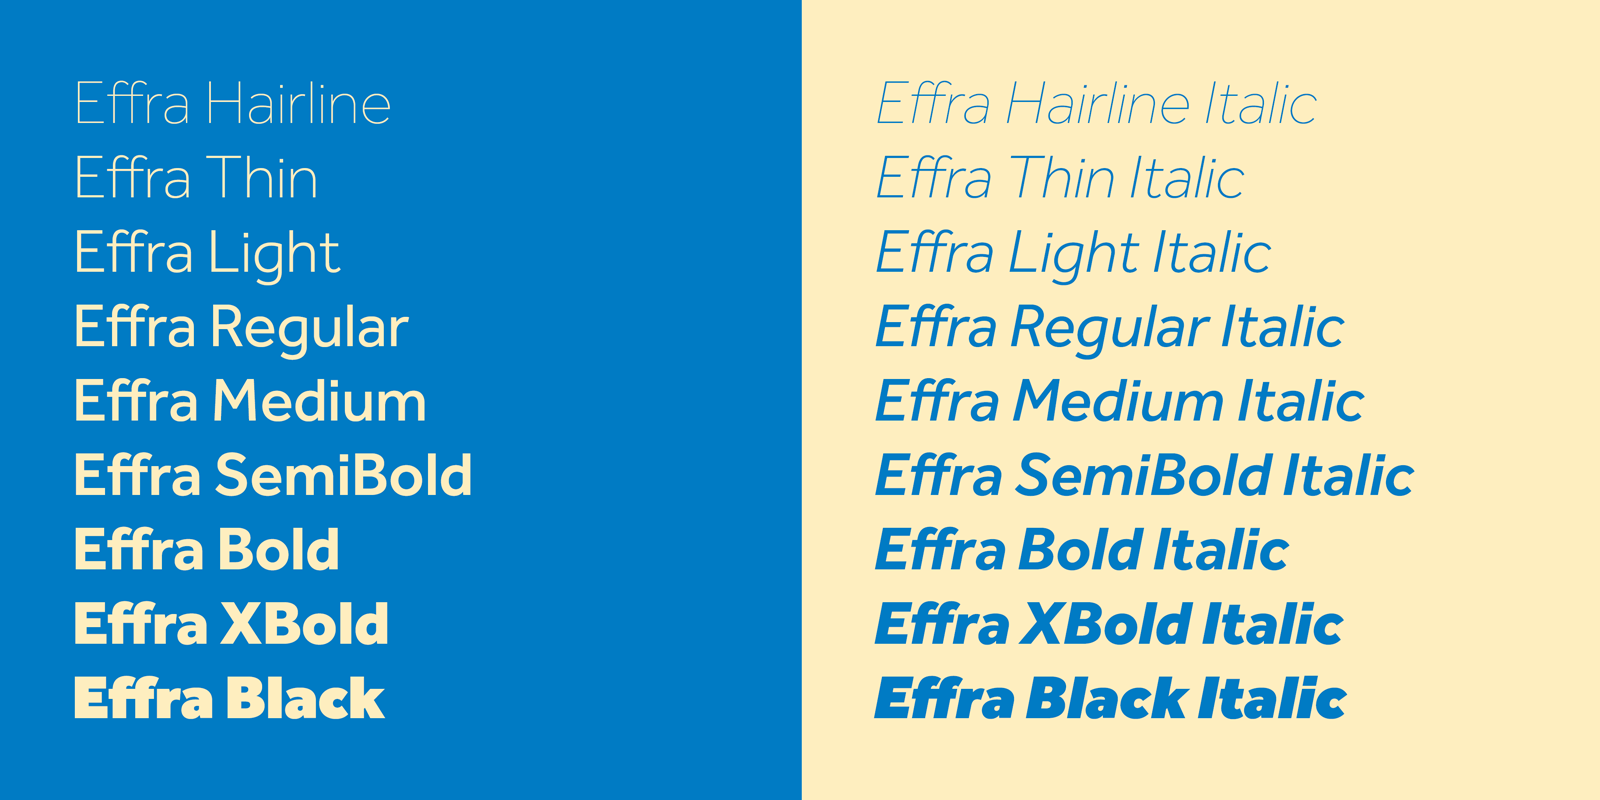 Card displaying Effra CC typeface in various styles